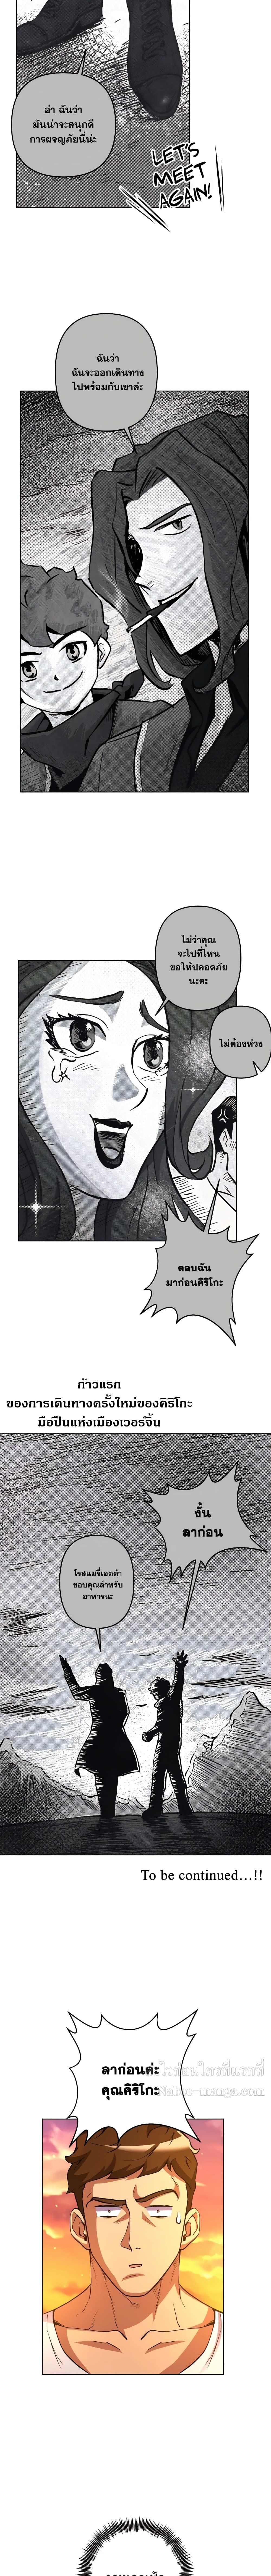 Surviving in an Action Manhwa - หน้า 8